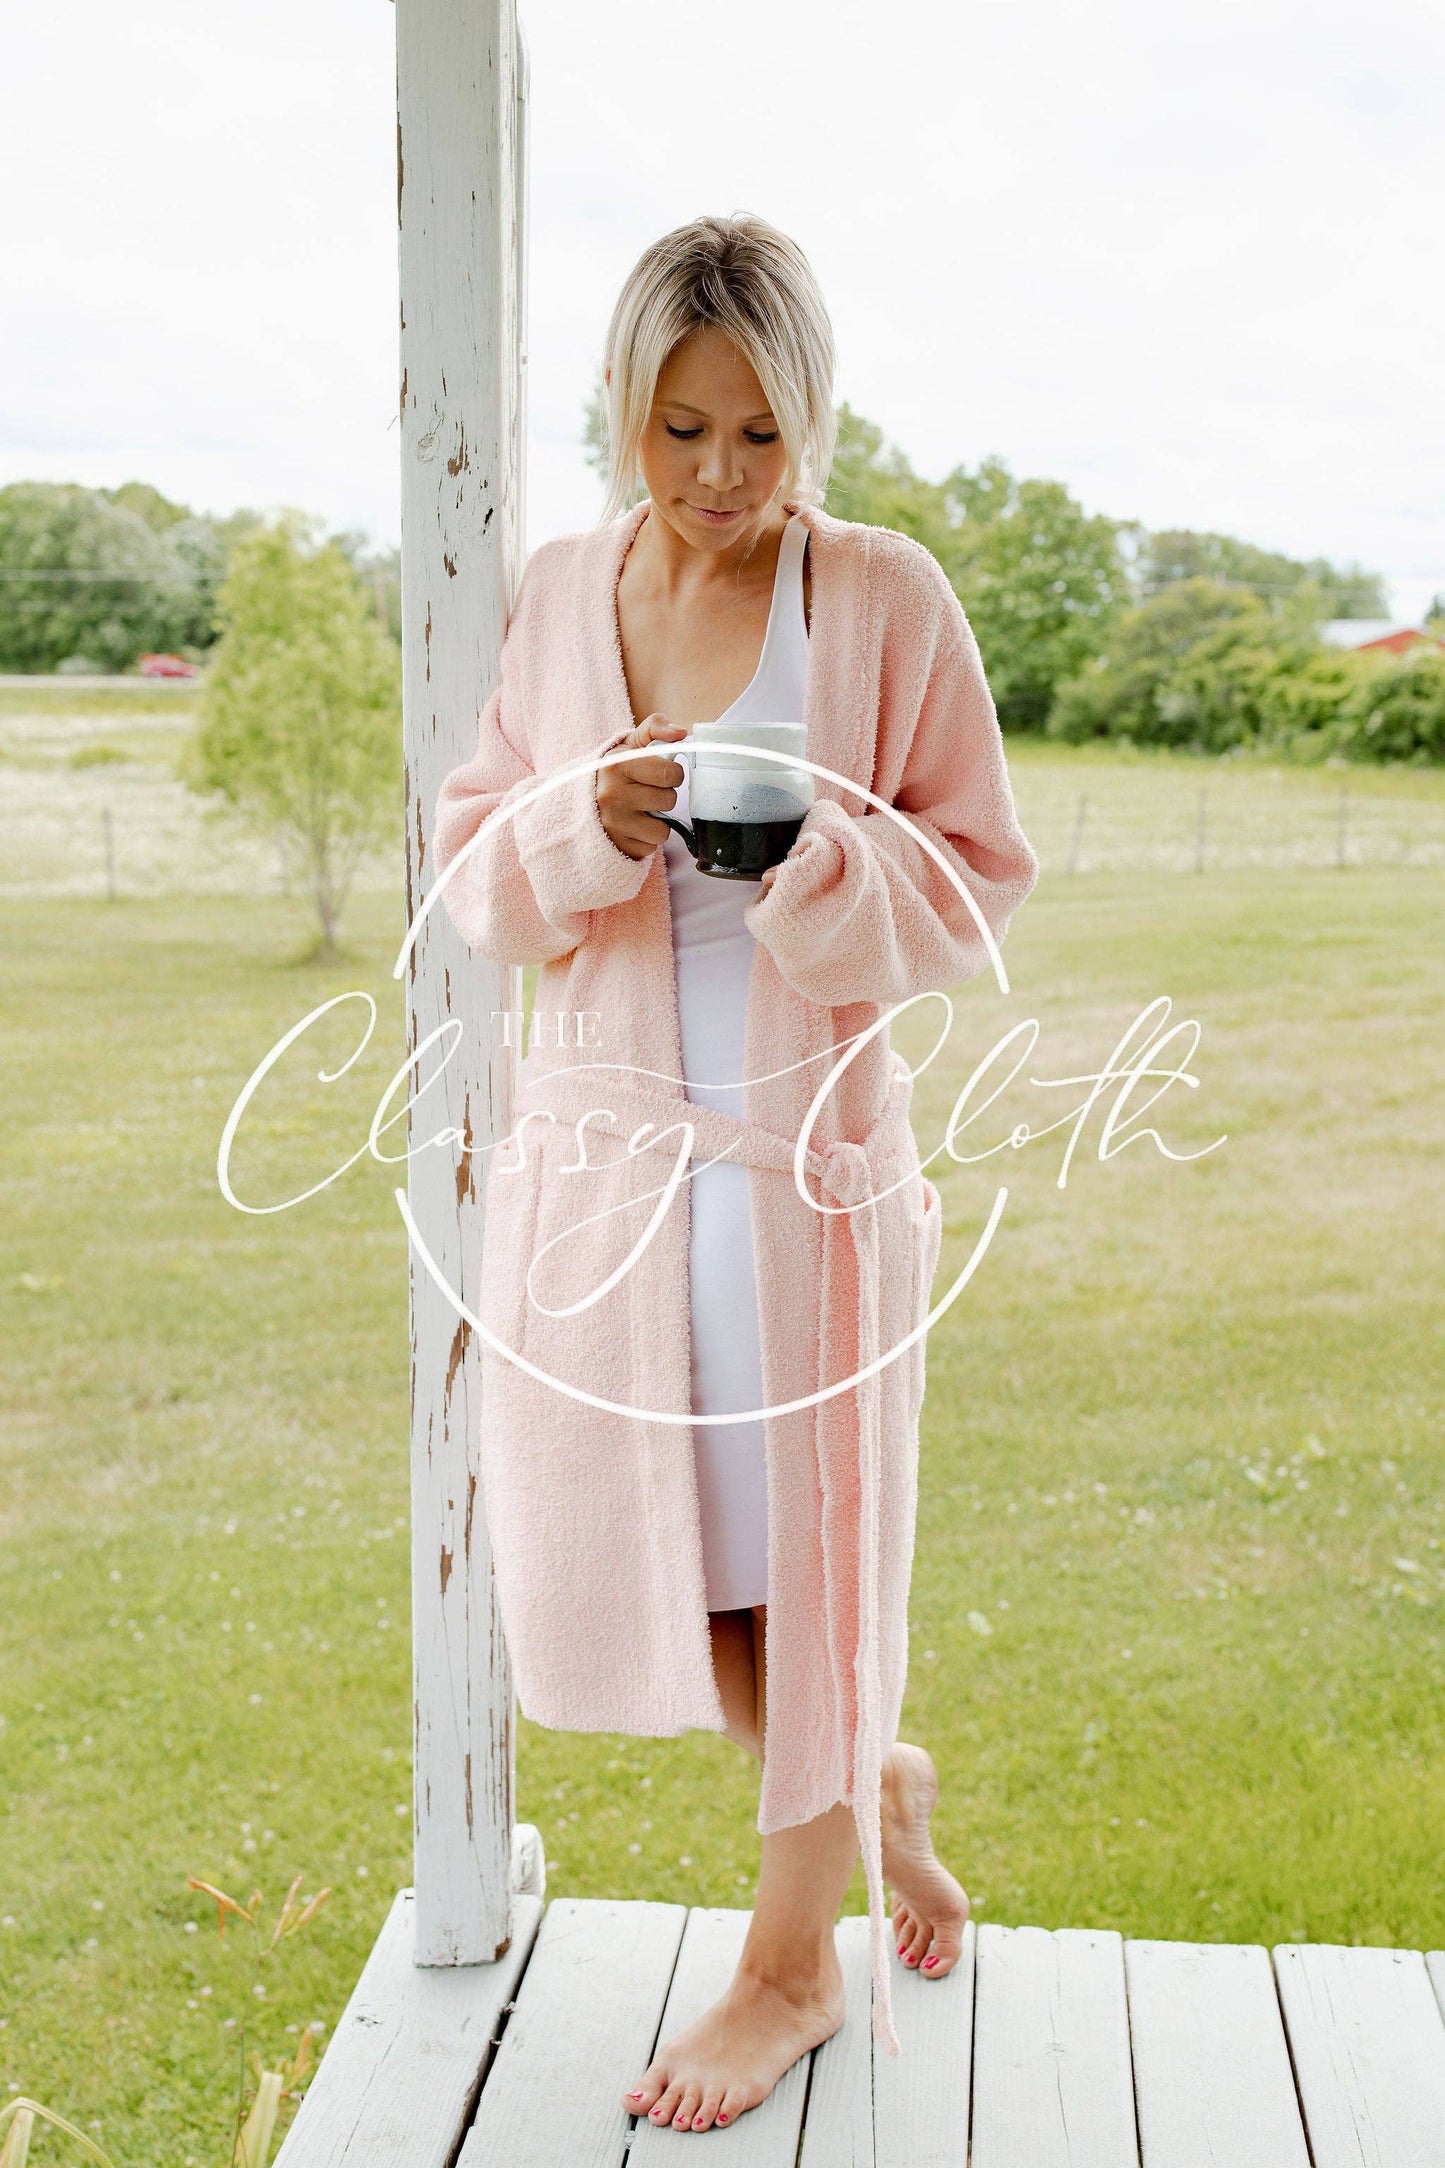 The Classy Cloth WS - Luxe Robe - Blush Pink RTS